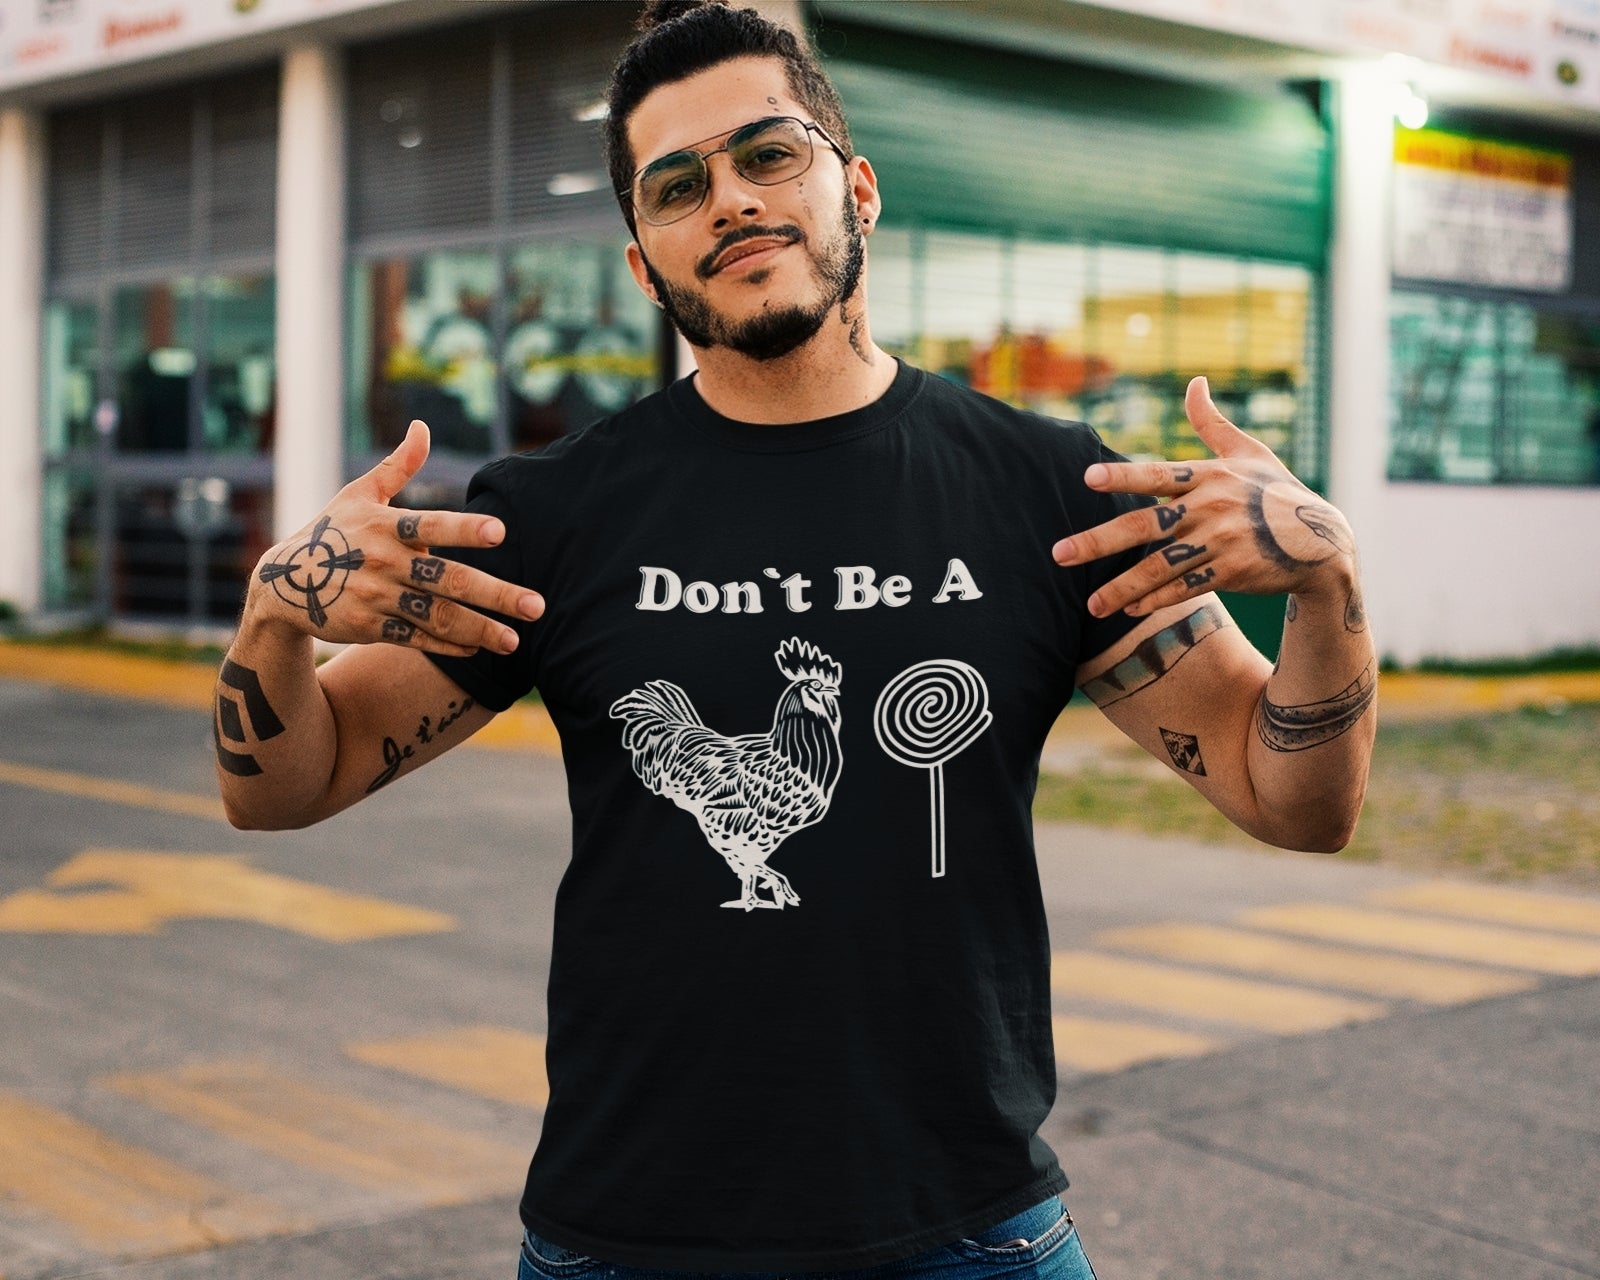 Mexican man wearing a black t-shirt with a lighthearted play on words graphic featuring a rooster and a lollipop